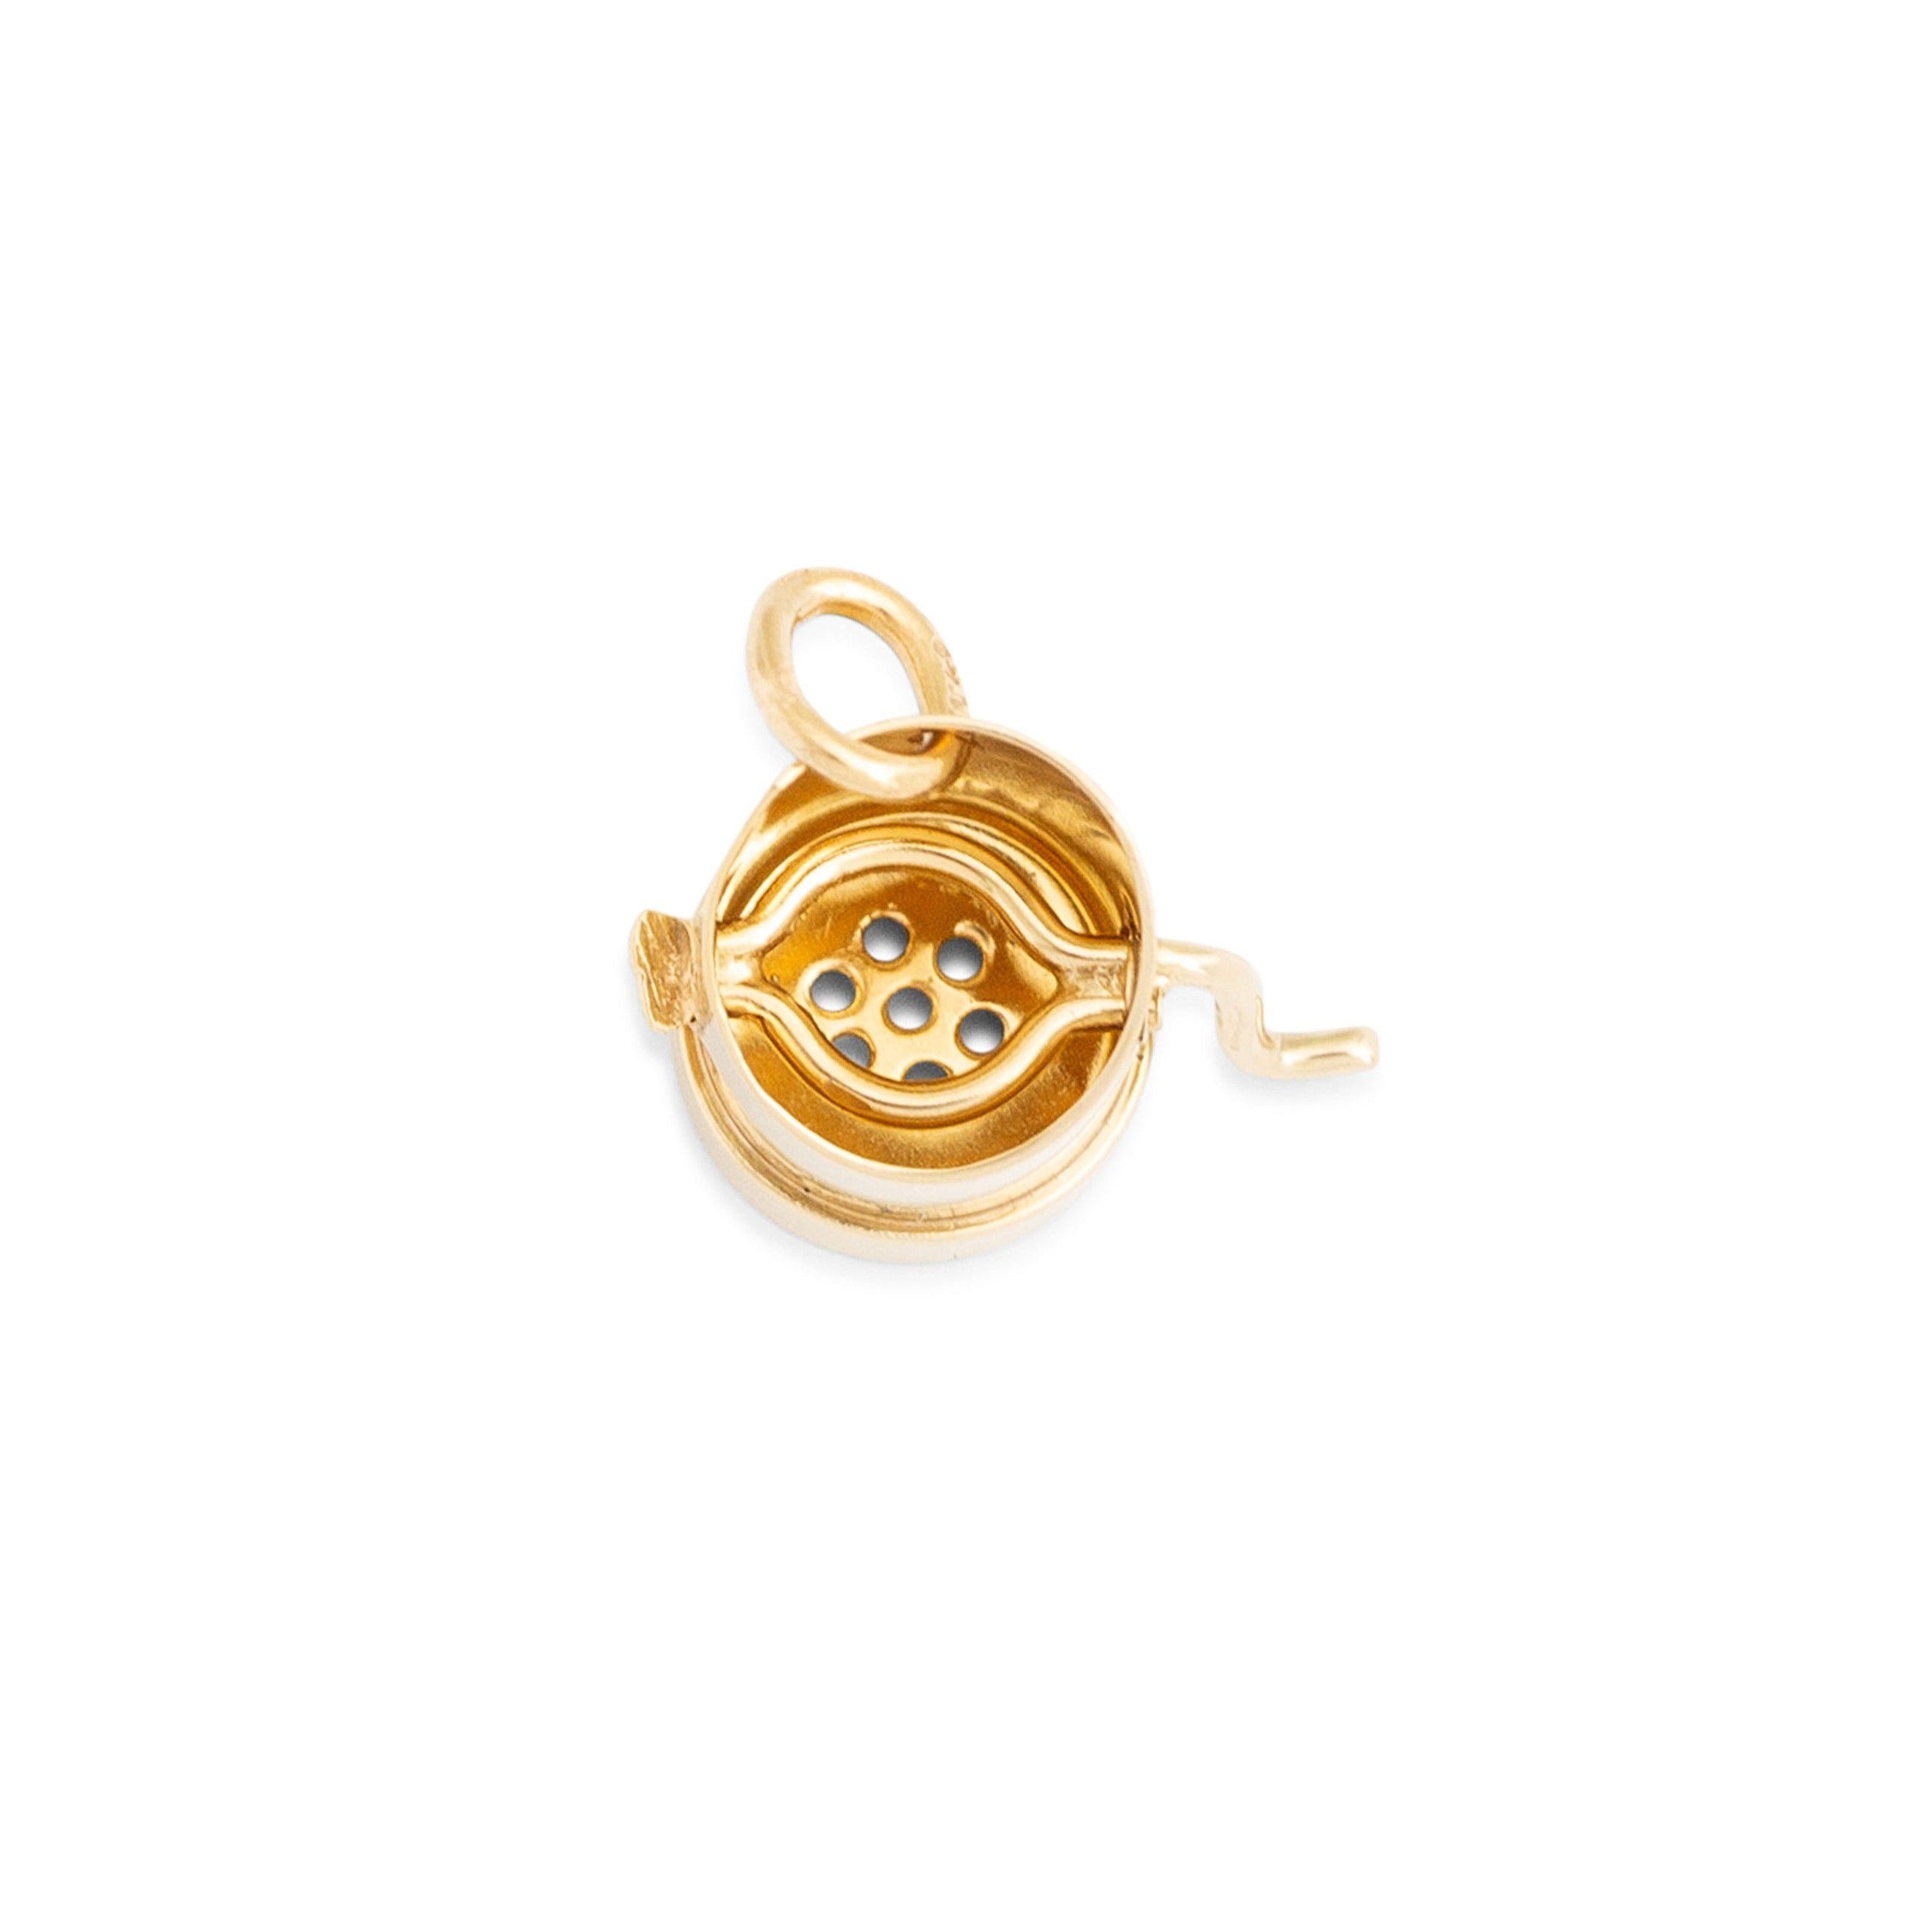 Movable Flour Sifter 14k Gold Charm